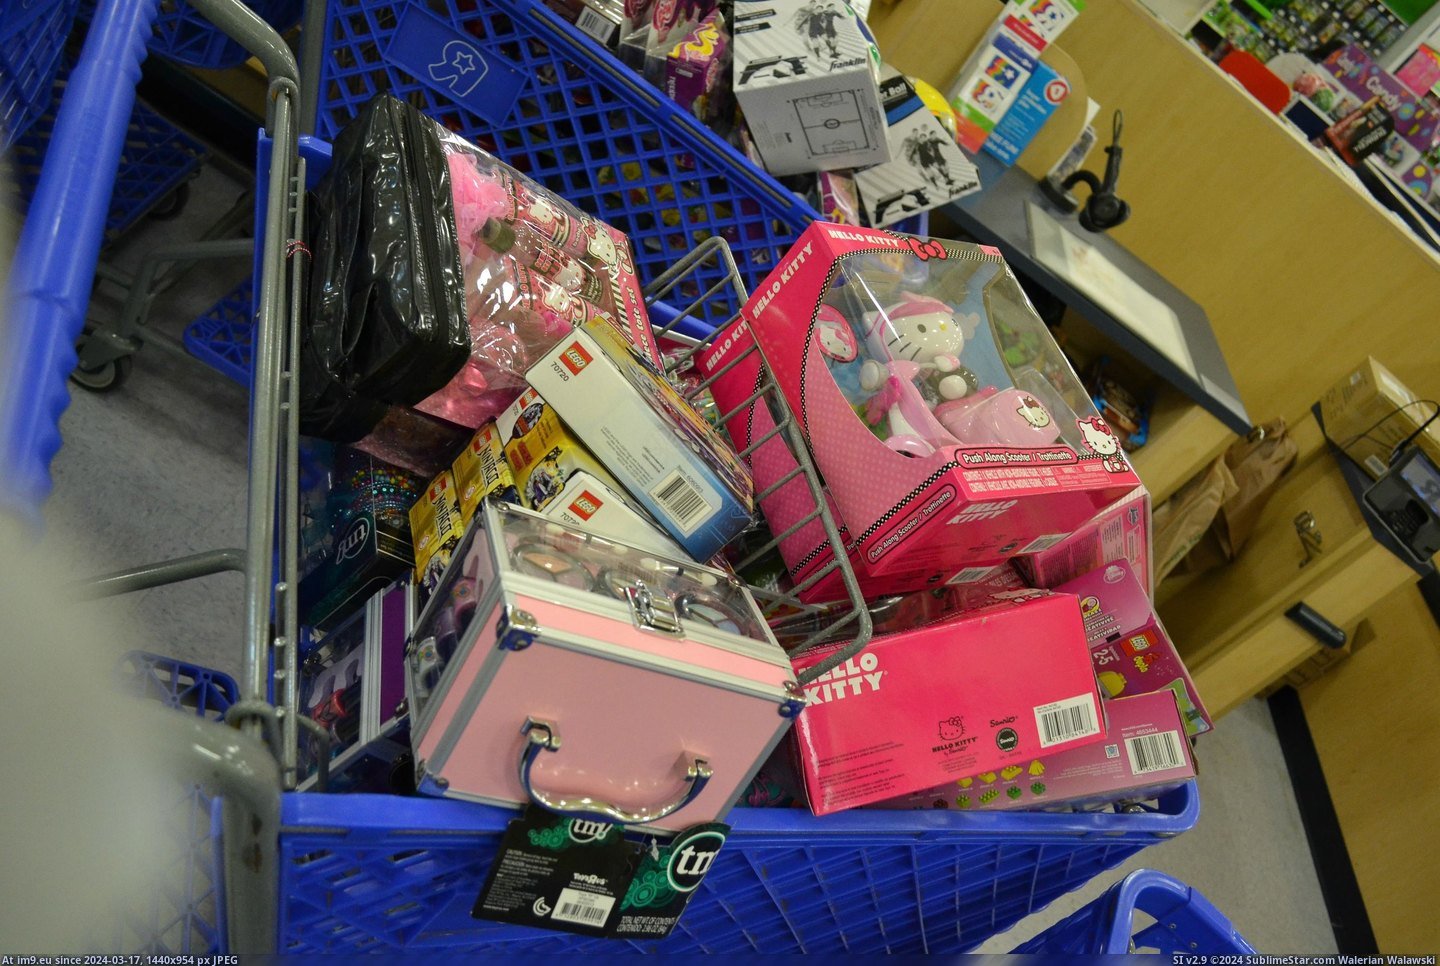 #For #Happy #All #Bunch #Tots #Donated #Christmas #Toys #Kids [Pics] Hopefully this makes a bunch of kids happy this Christmas all donated to Toys for Tots. 3 Pic. (Изображение из альбом My r/PICS favs))